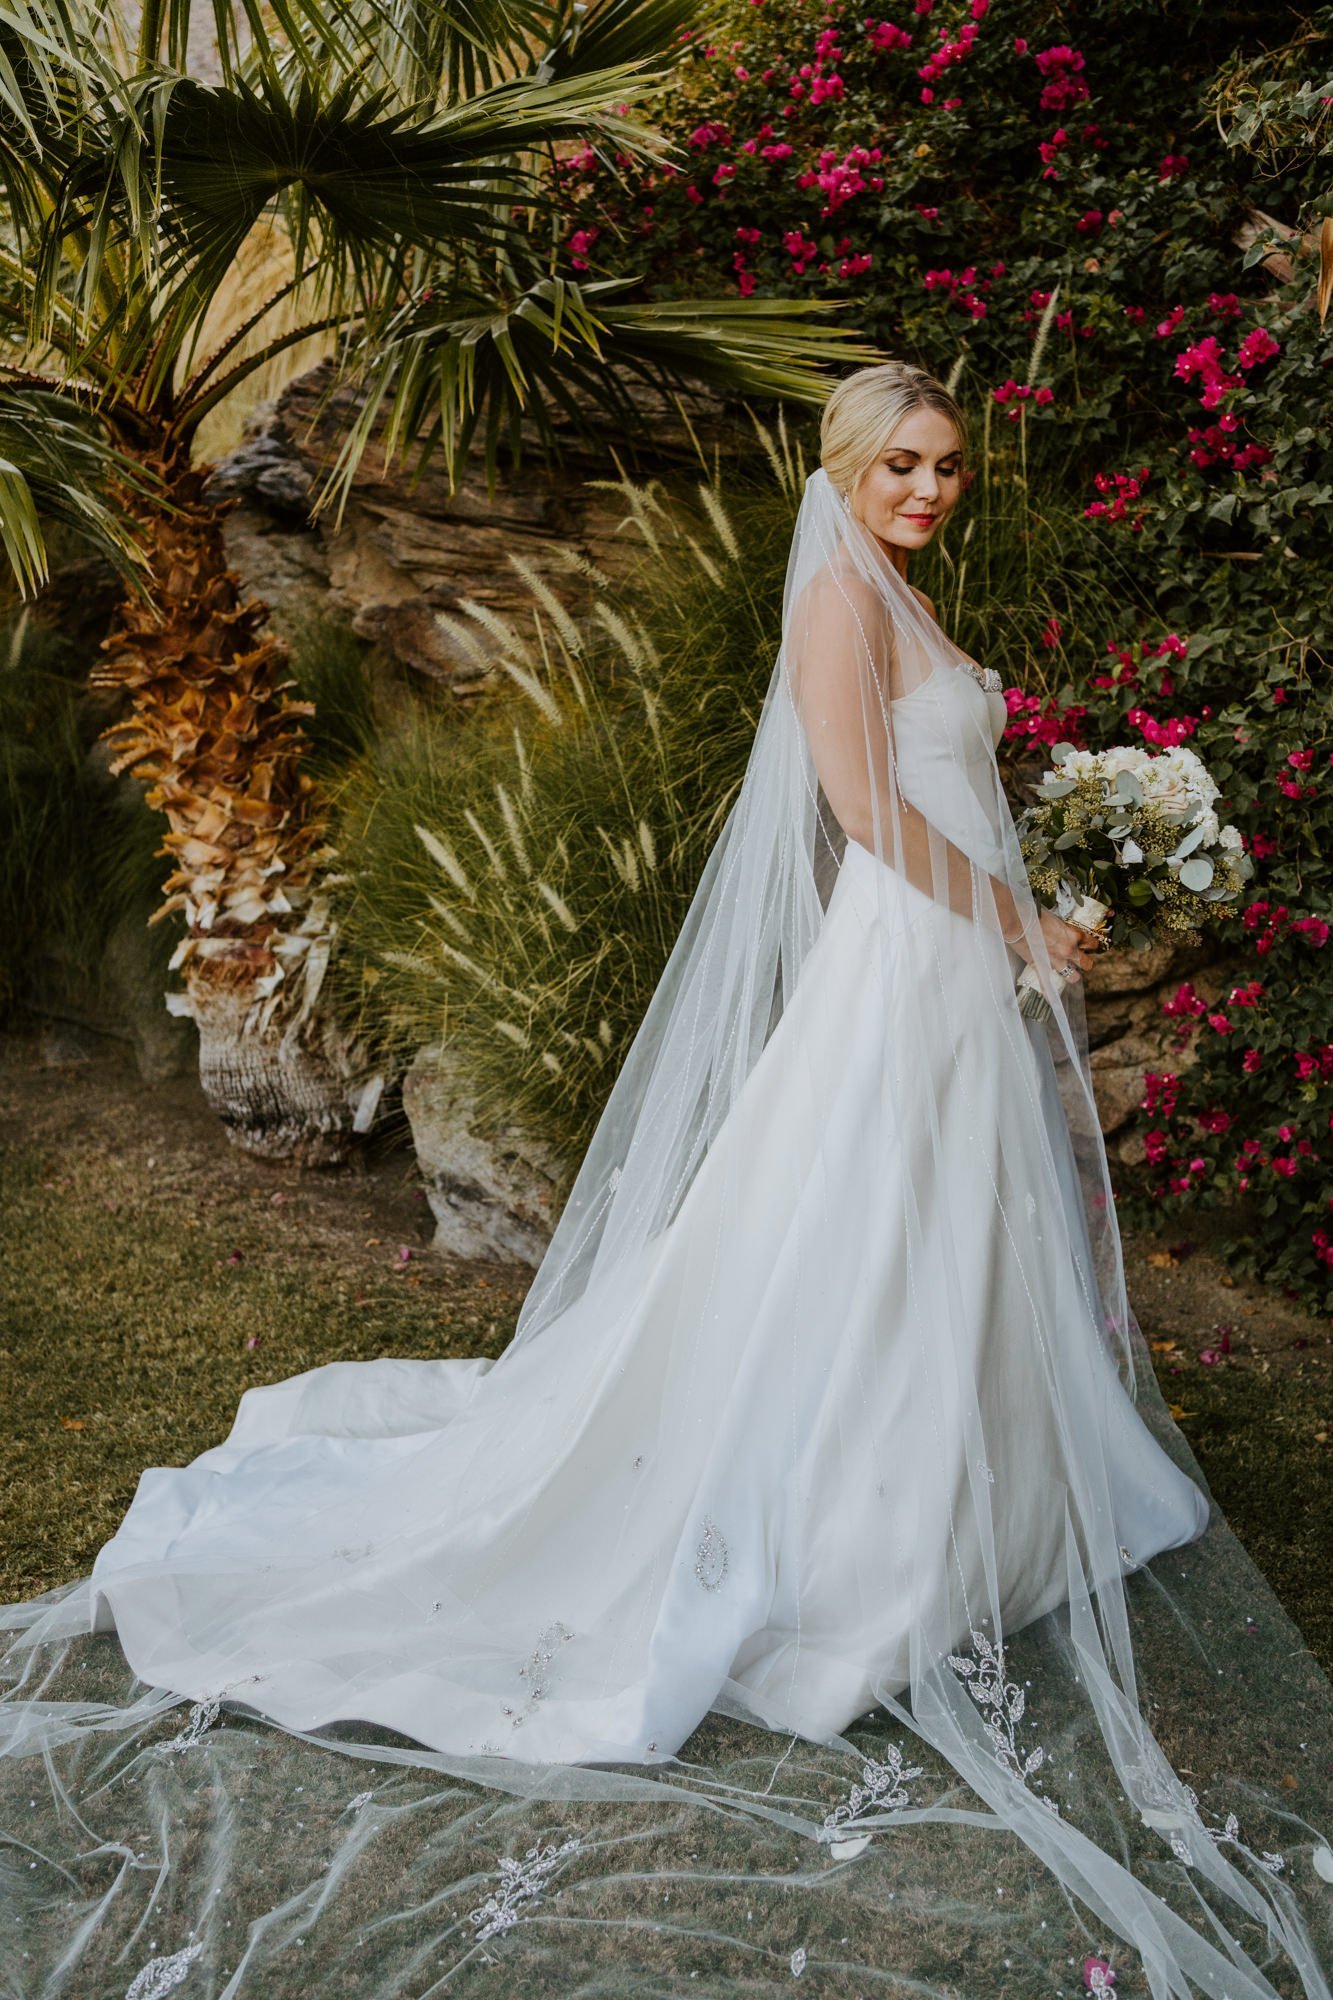 Elegant and classic bride with cathedral veil at The O’Donnell House wedding in Palm Springs, vibrant southern california wedding photography by Tida Svy